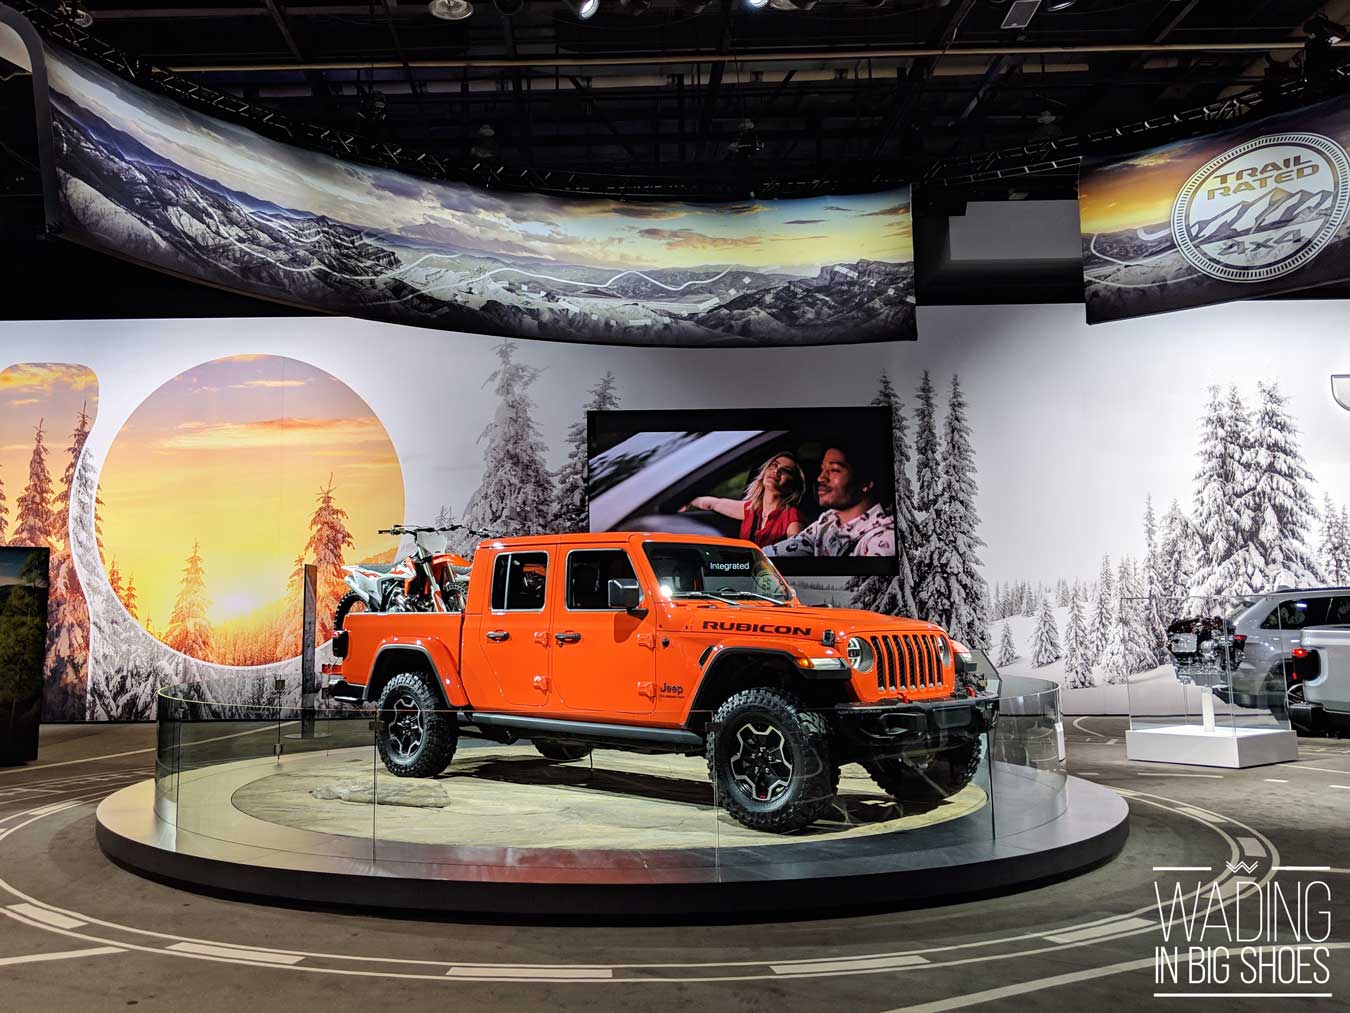 Detroit Auto Show 2019 Highlights: Must-See Cars + Best Interactive Exhibits